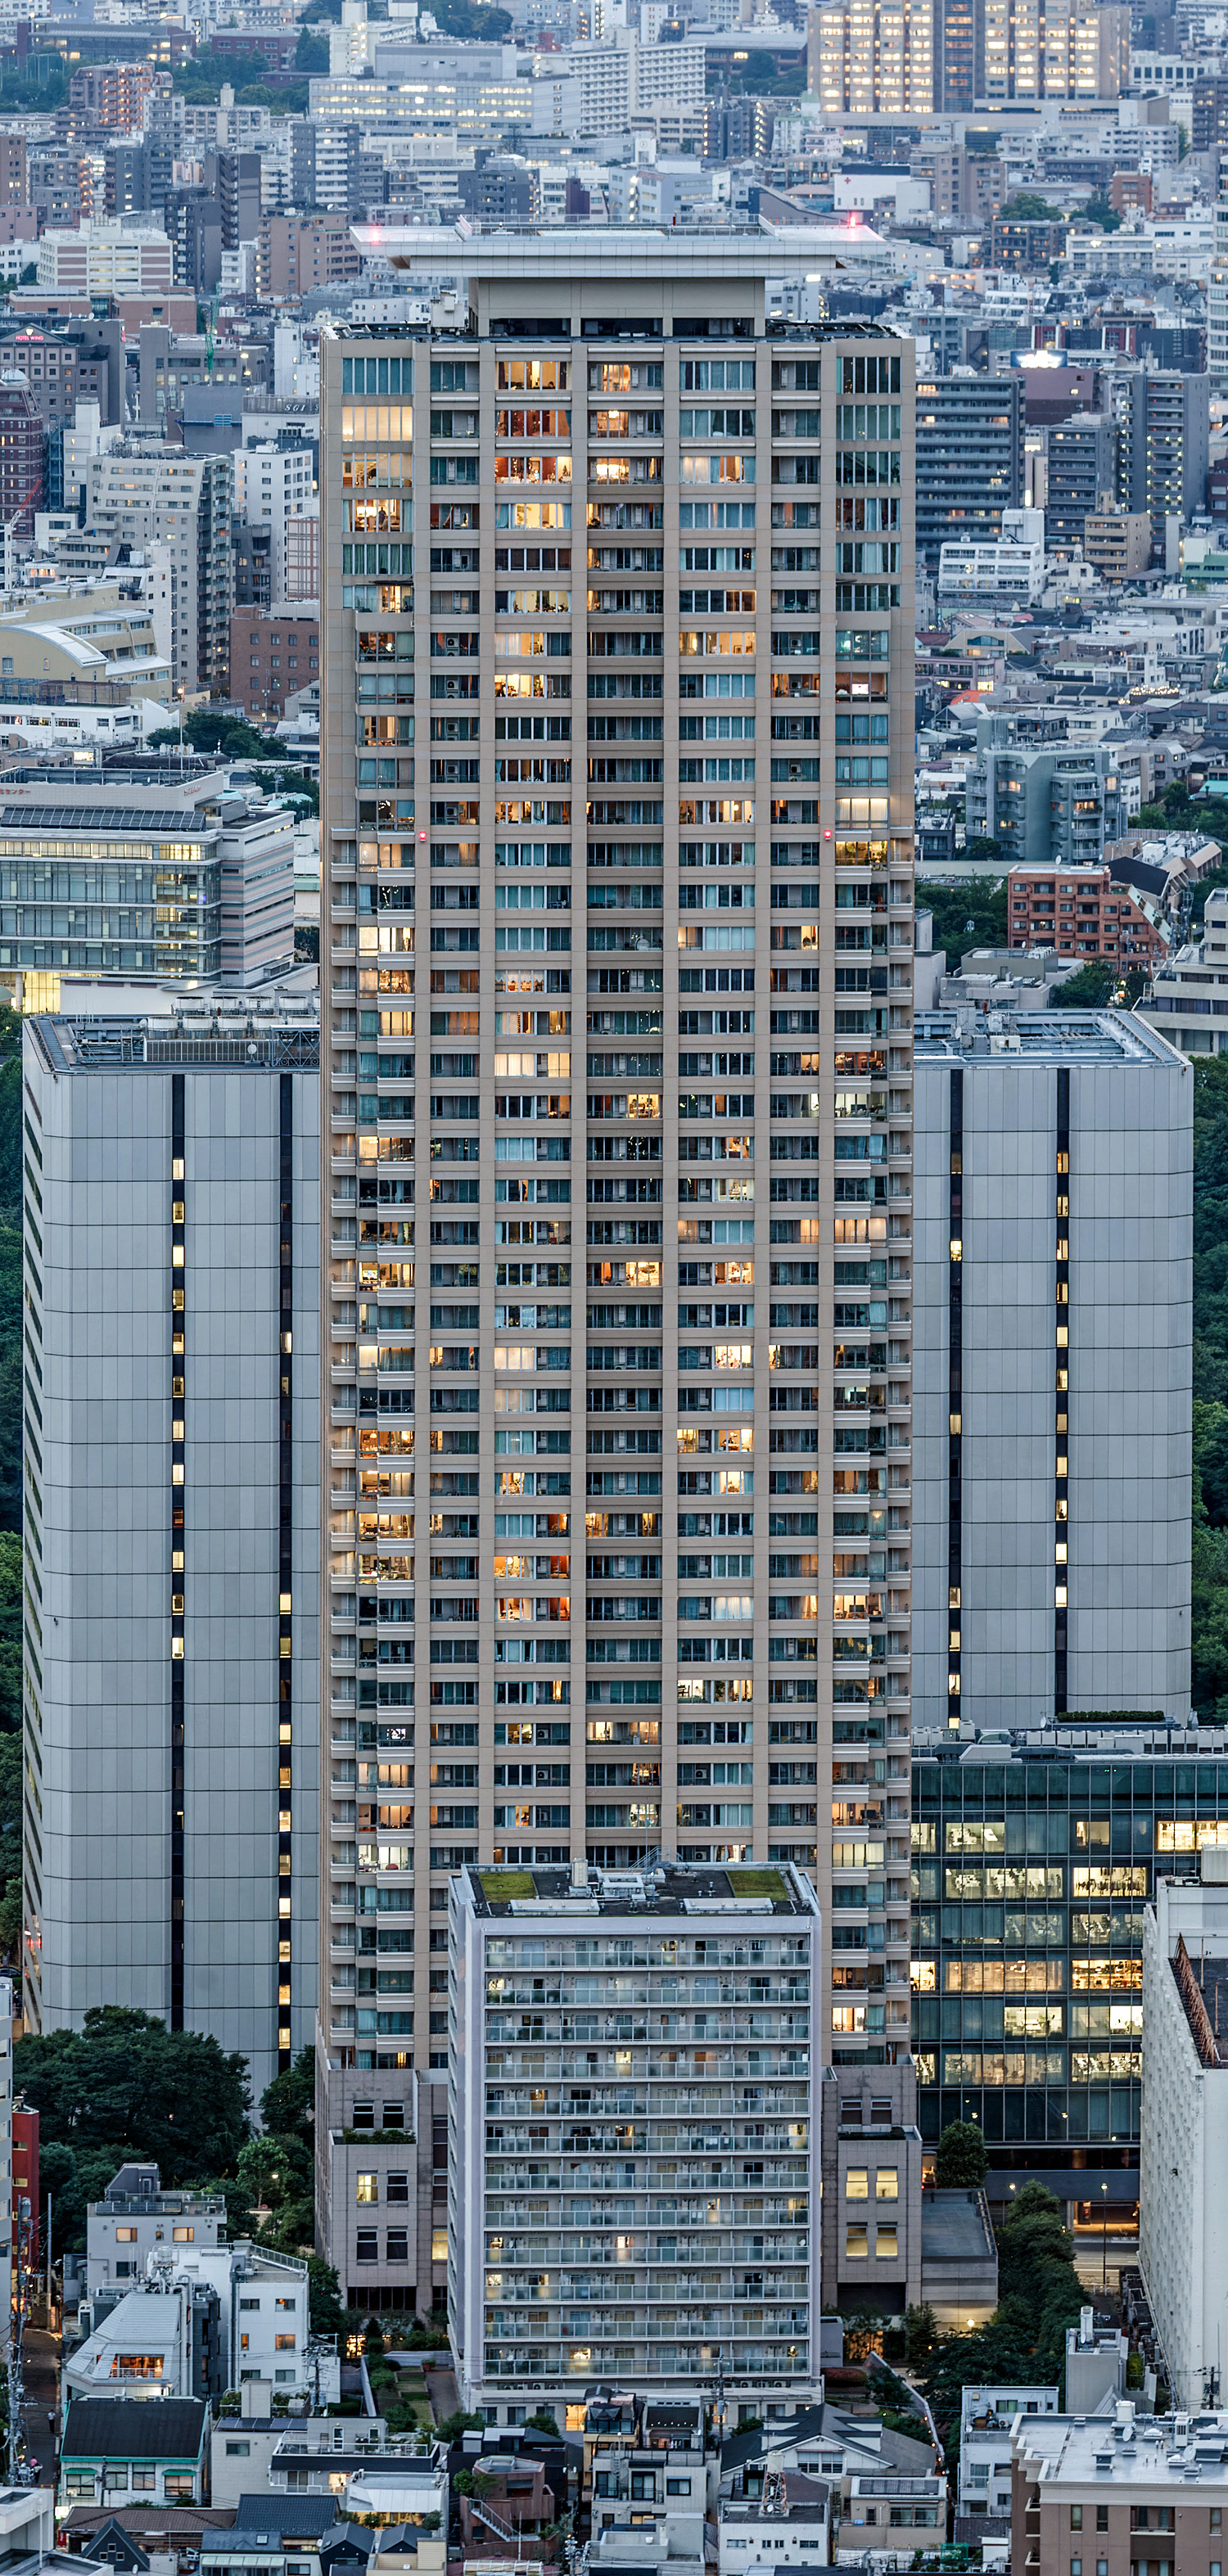 Park Axis Aoyama 1-chome Tower, Tokyo - View from Roppongi Hills Mori Tower. © Mathias Beinling